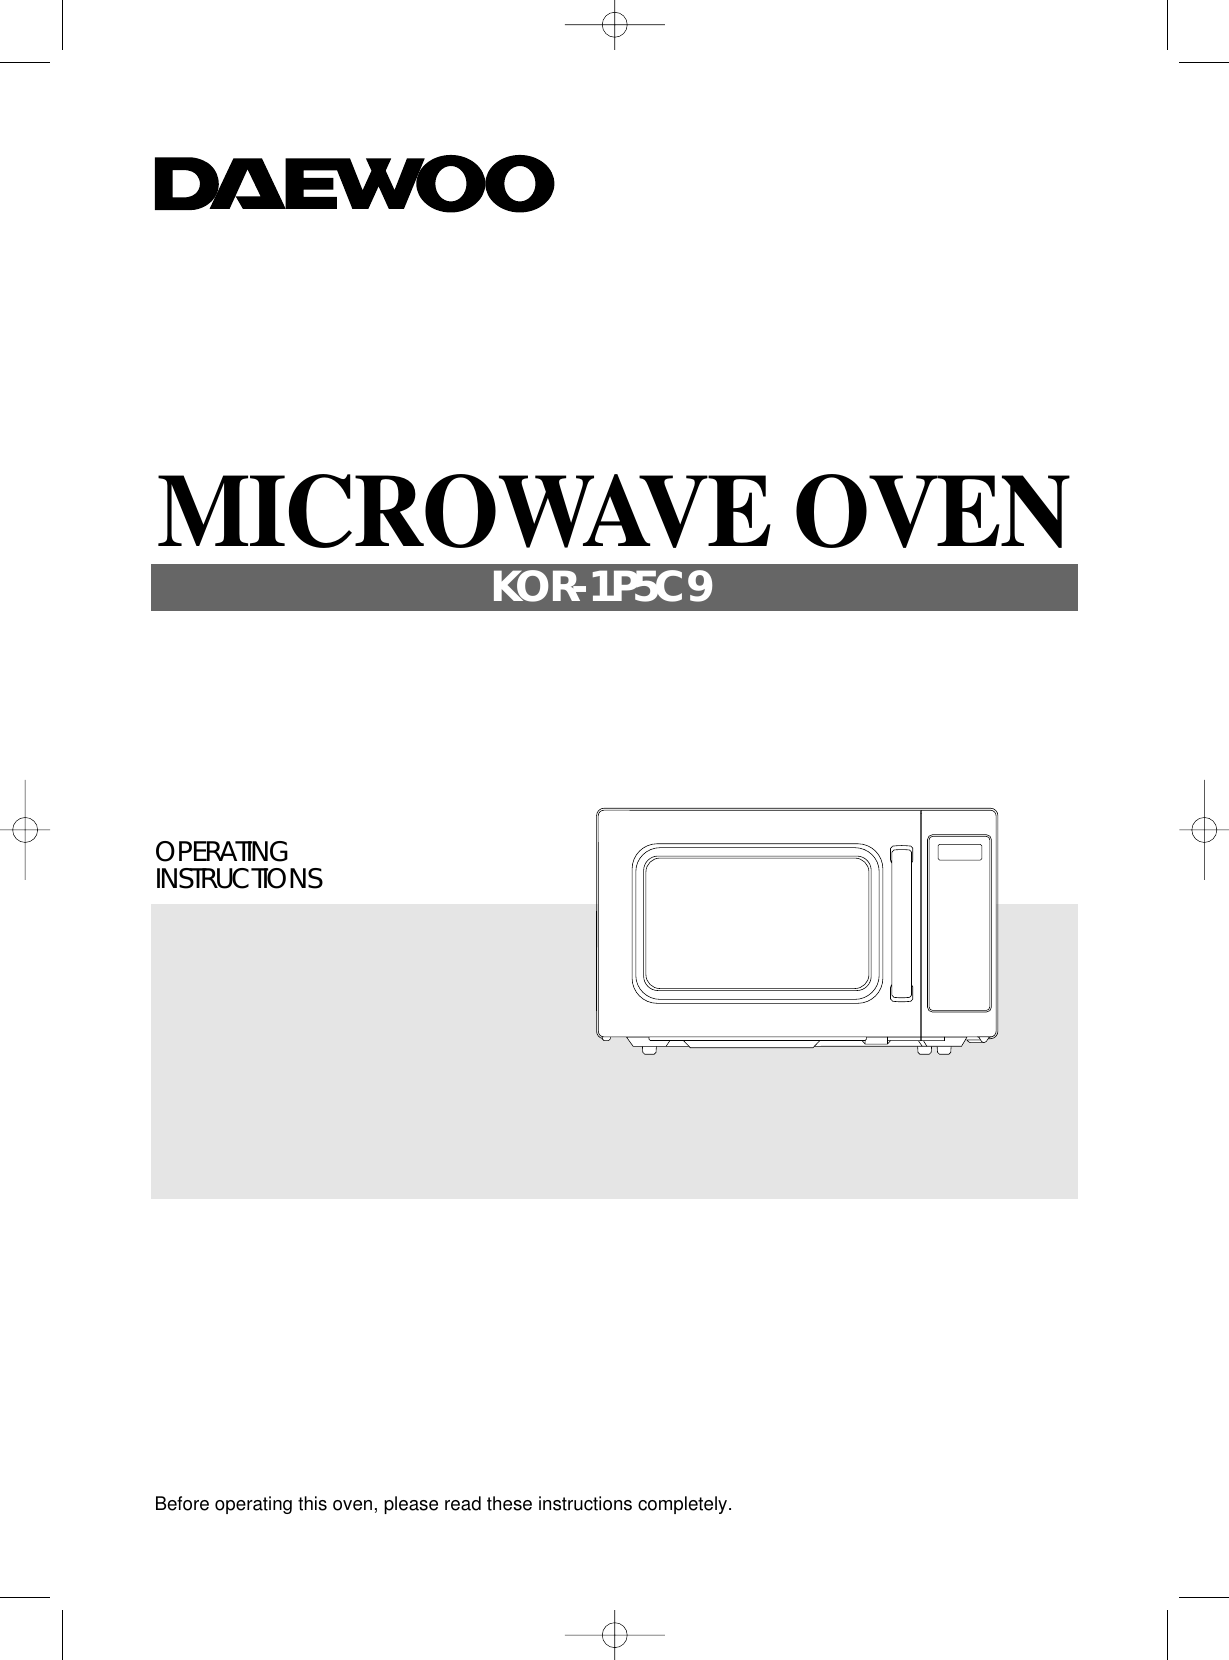 Before operating this oven, please read these instructions completely.OPERATINGINSTRUCTIONSMICROWAVE OVENKOR-1P5C9